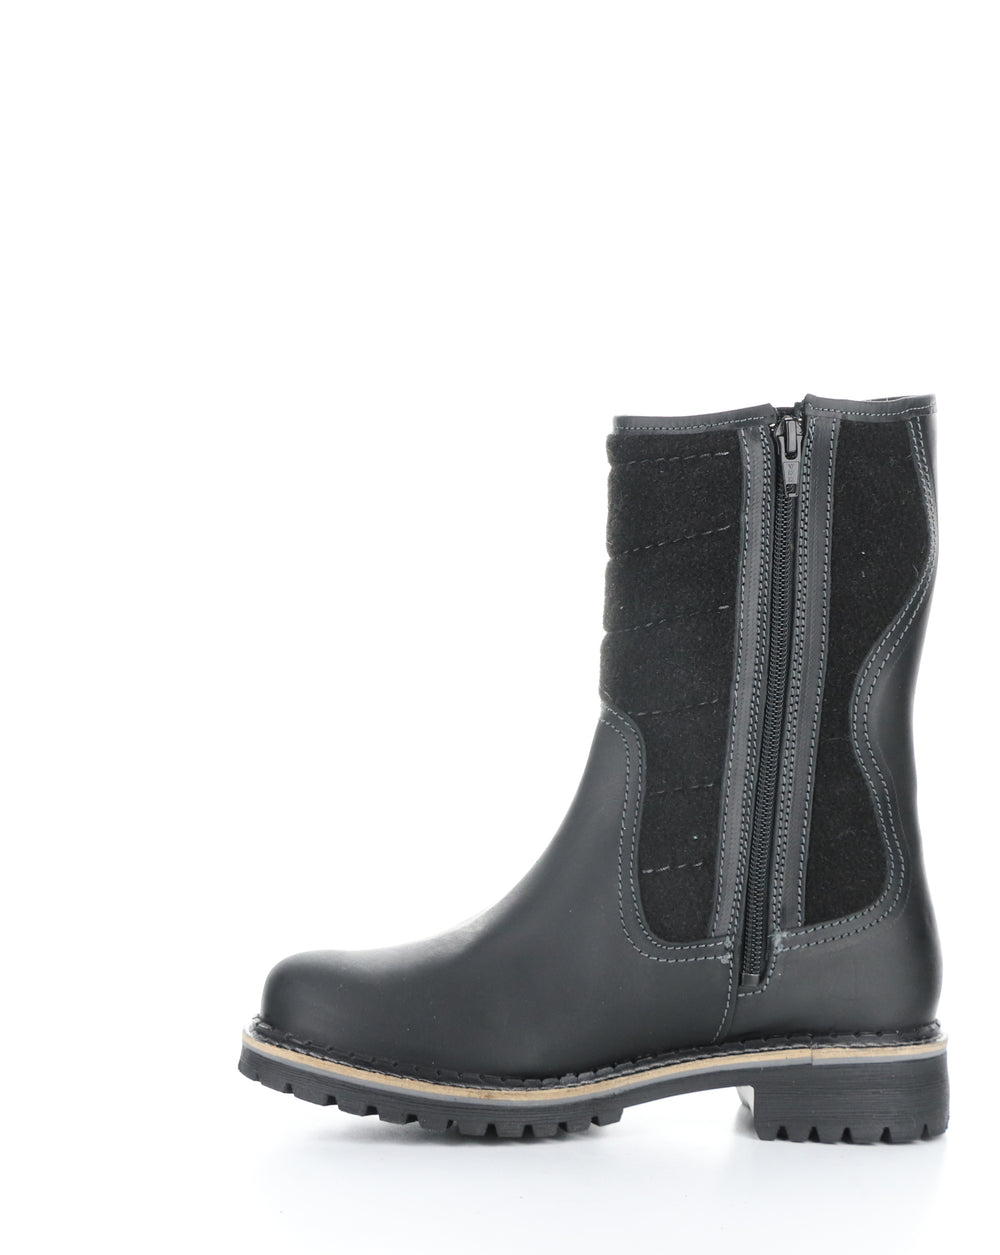 HARLYN BLACK Round Toe Boots